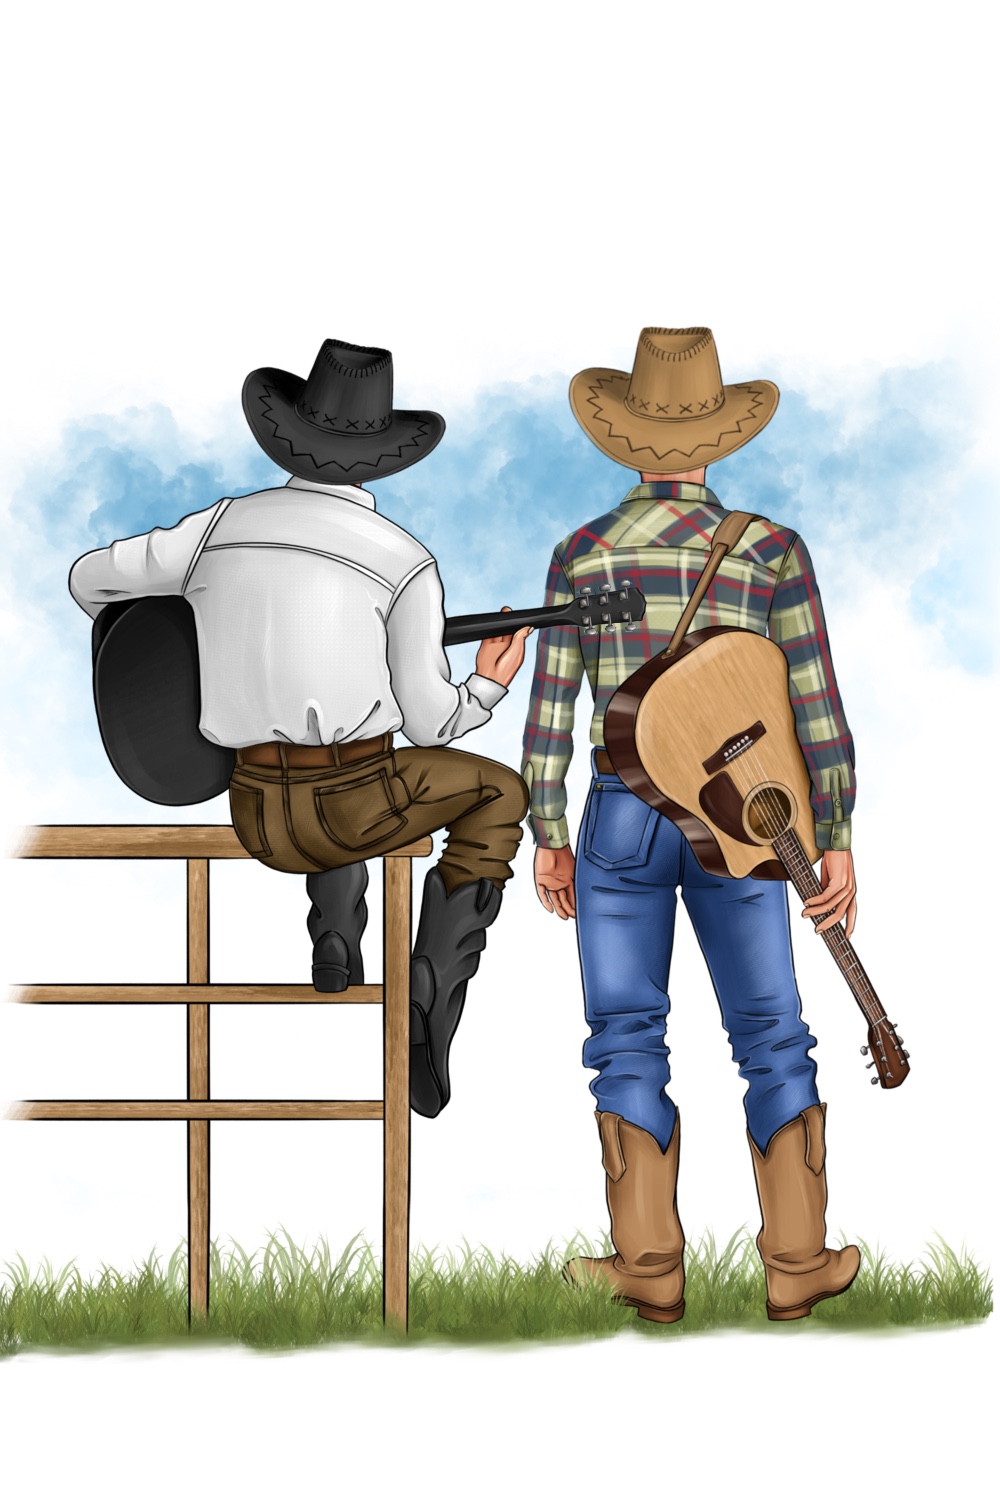 Two cowboys with guitars from the back.